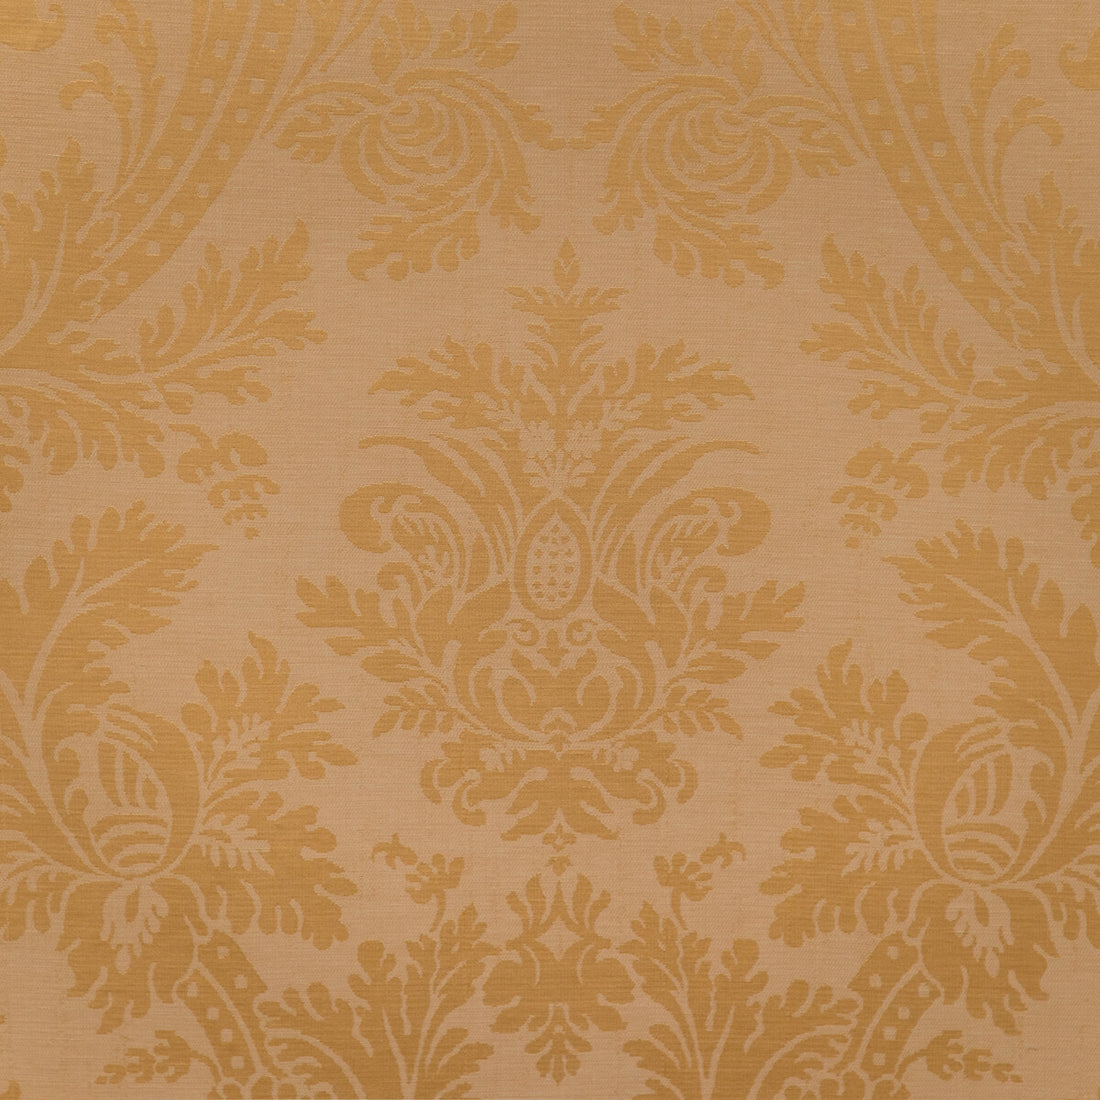 Arnaud Damask fabric in gold color - pattern 8023150.40.0 - by Brunschwig &amp; Fils in the Vienne Silks collection